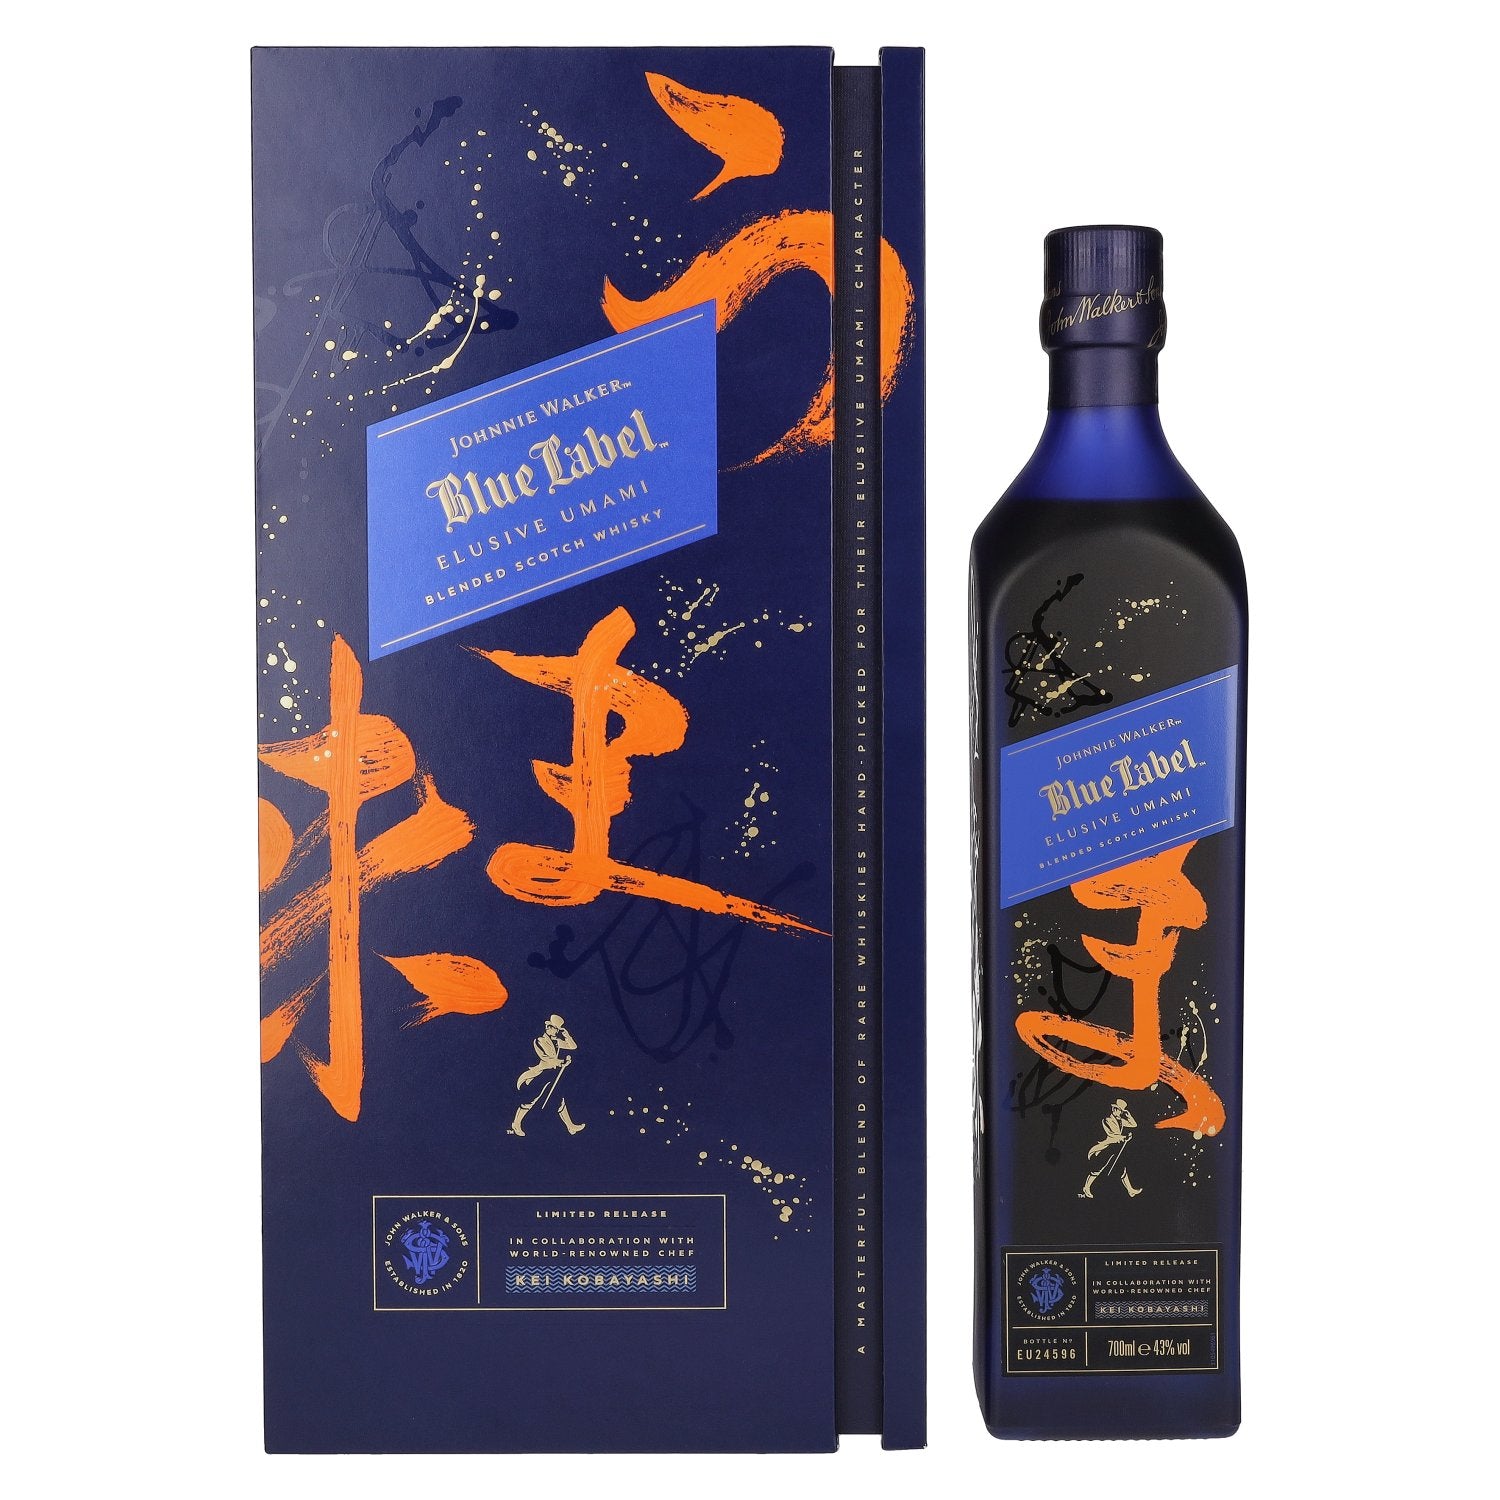 Johnnie Walker Blue Label ELUSIVE UMAMI Blended Scotch Whisky Limited Release 43% Vol. 0,7l in Giftbox